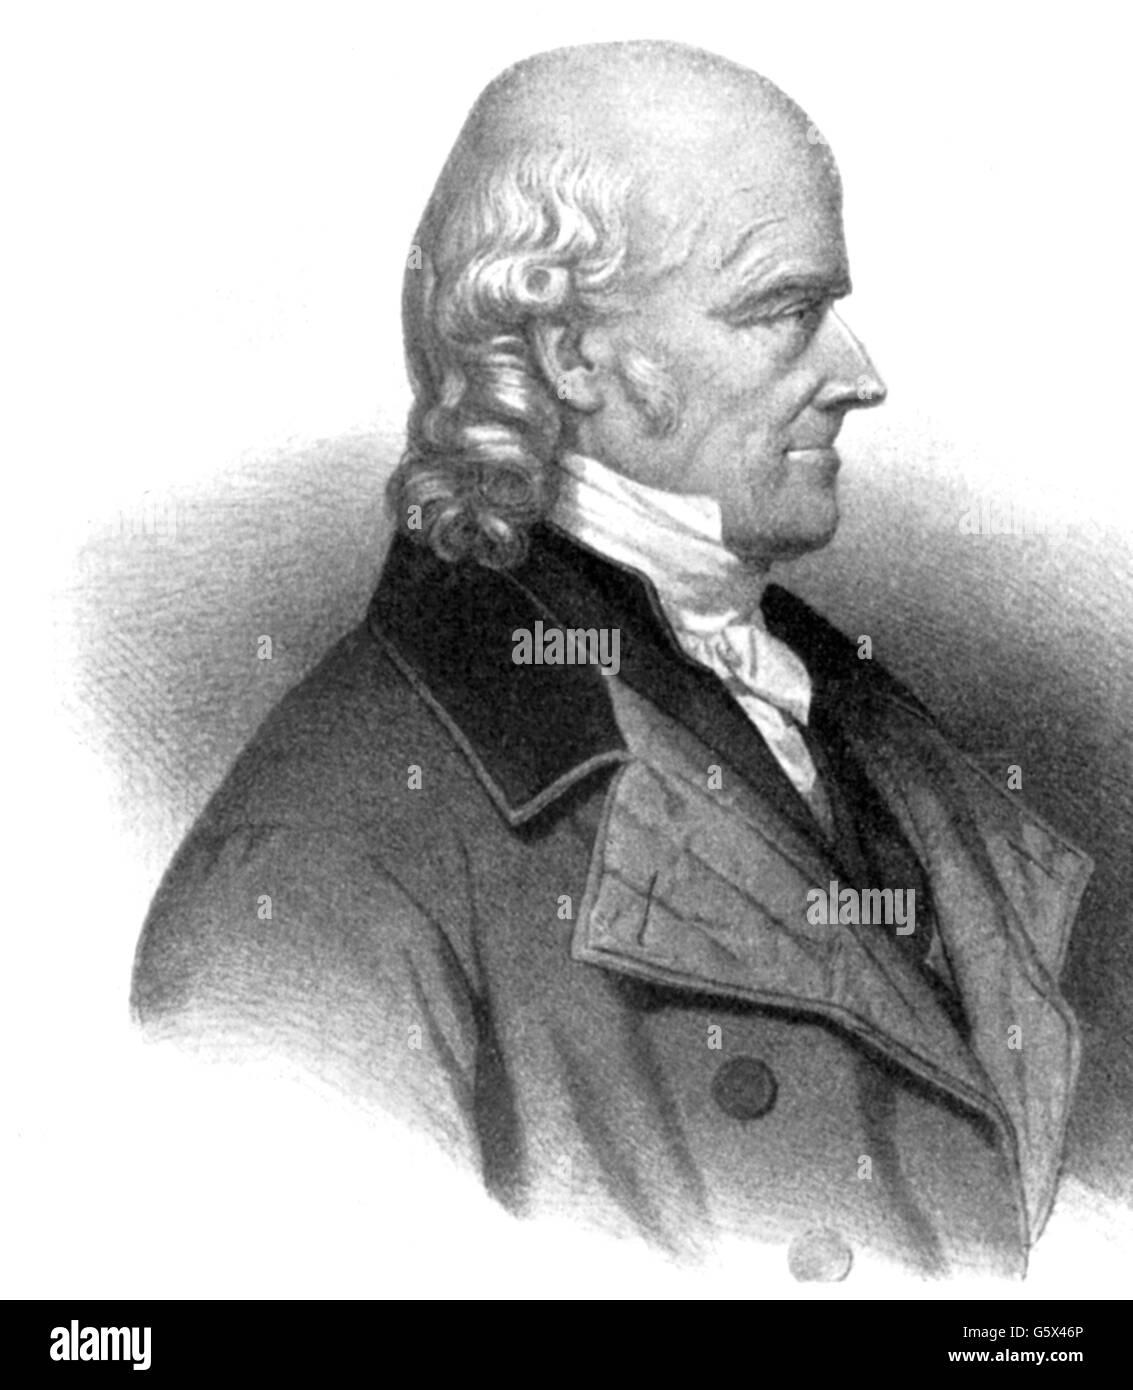 Hahnemann, Christian Friedrich Samuel, 10.4.1755 - 2.7.1843, German physician / medical doctor, half length, after drawing by Nicolas-Eustache Maurin (1795 - 1850), lithograph by Roselin, Paris, circa 1840, Stock Photo